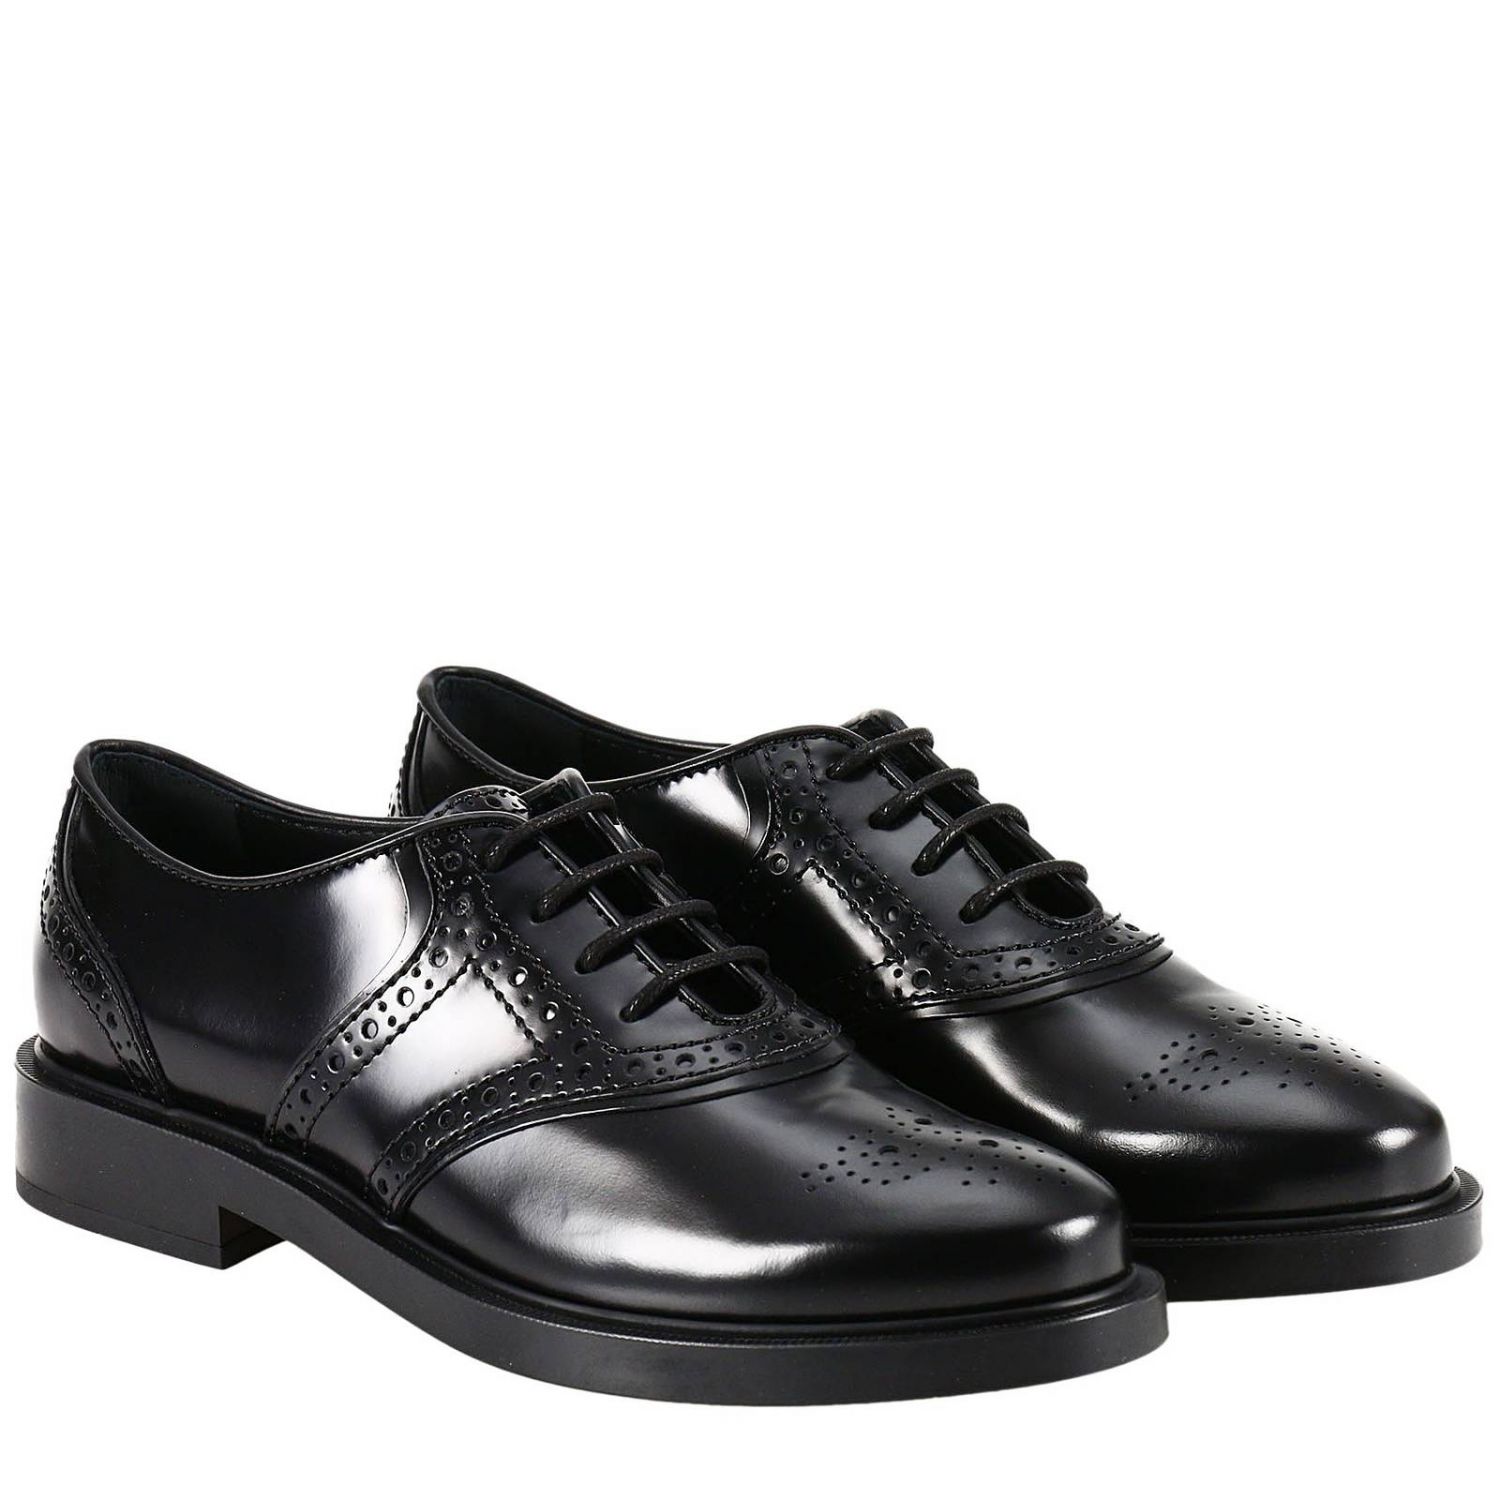 Tods Outlet: Shoes women Tod's | Oxford Shoes Tods Women Black | Oxford ...